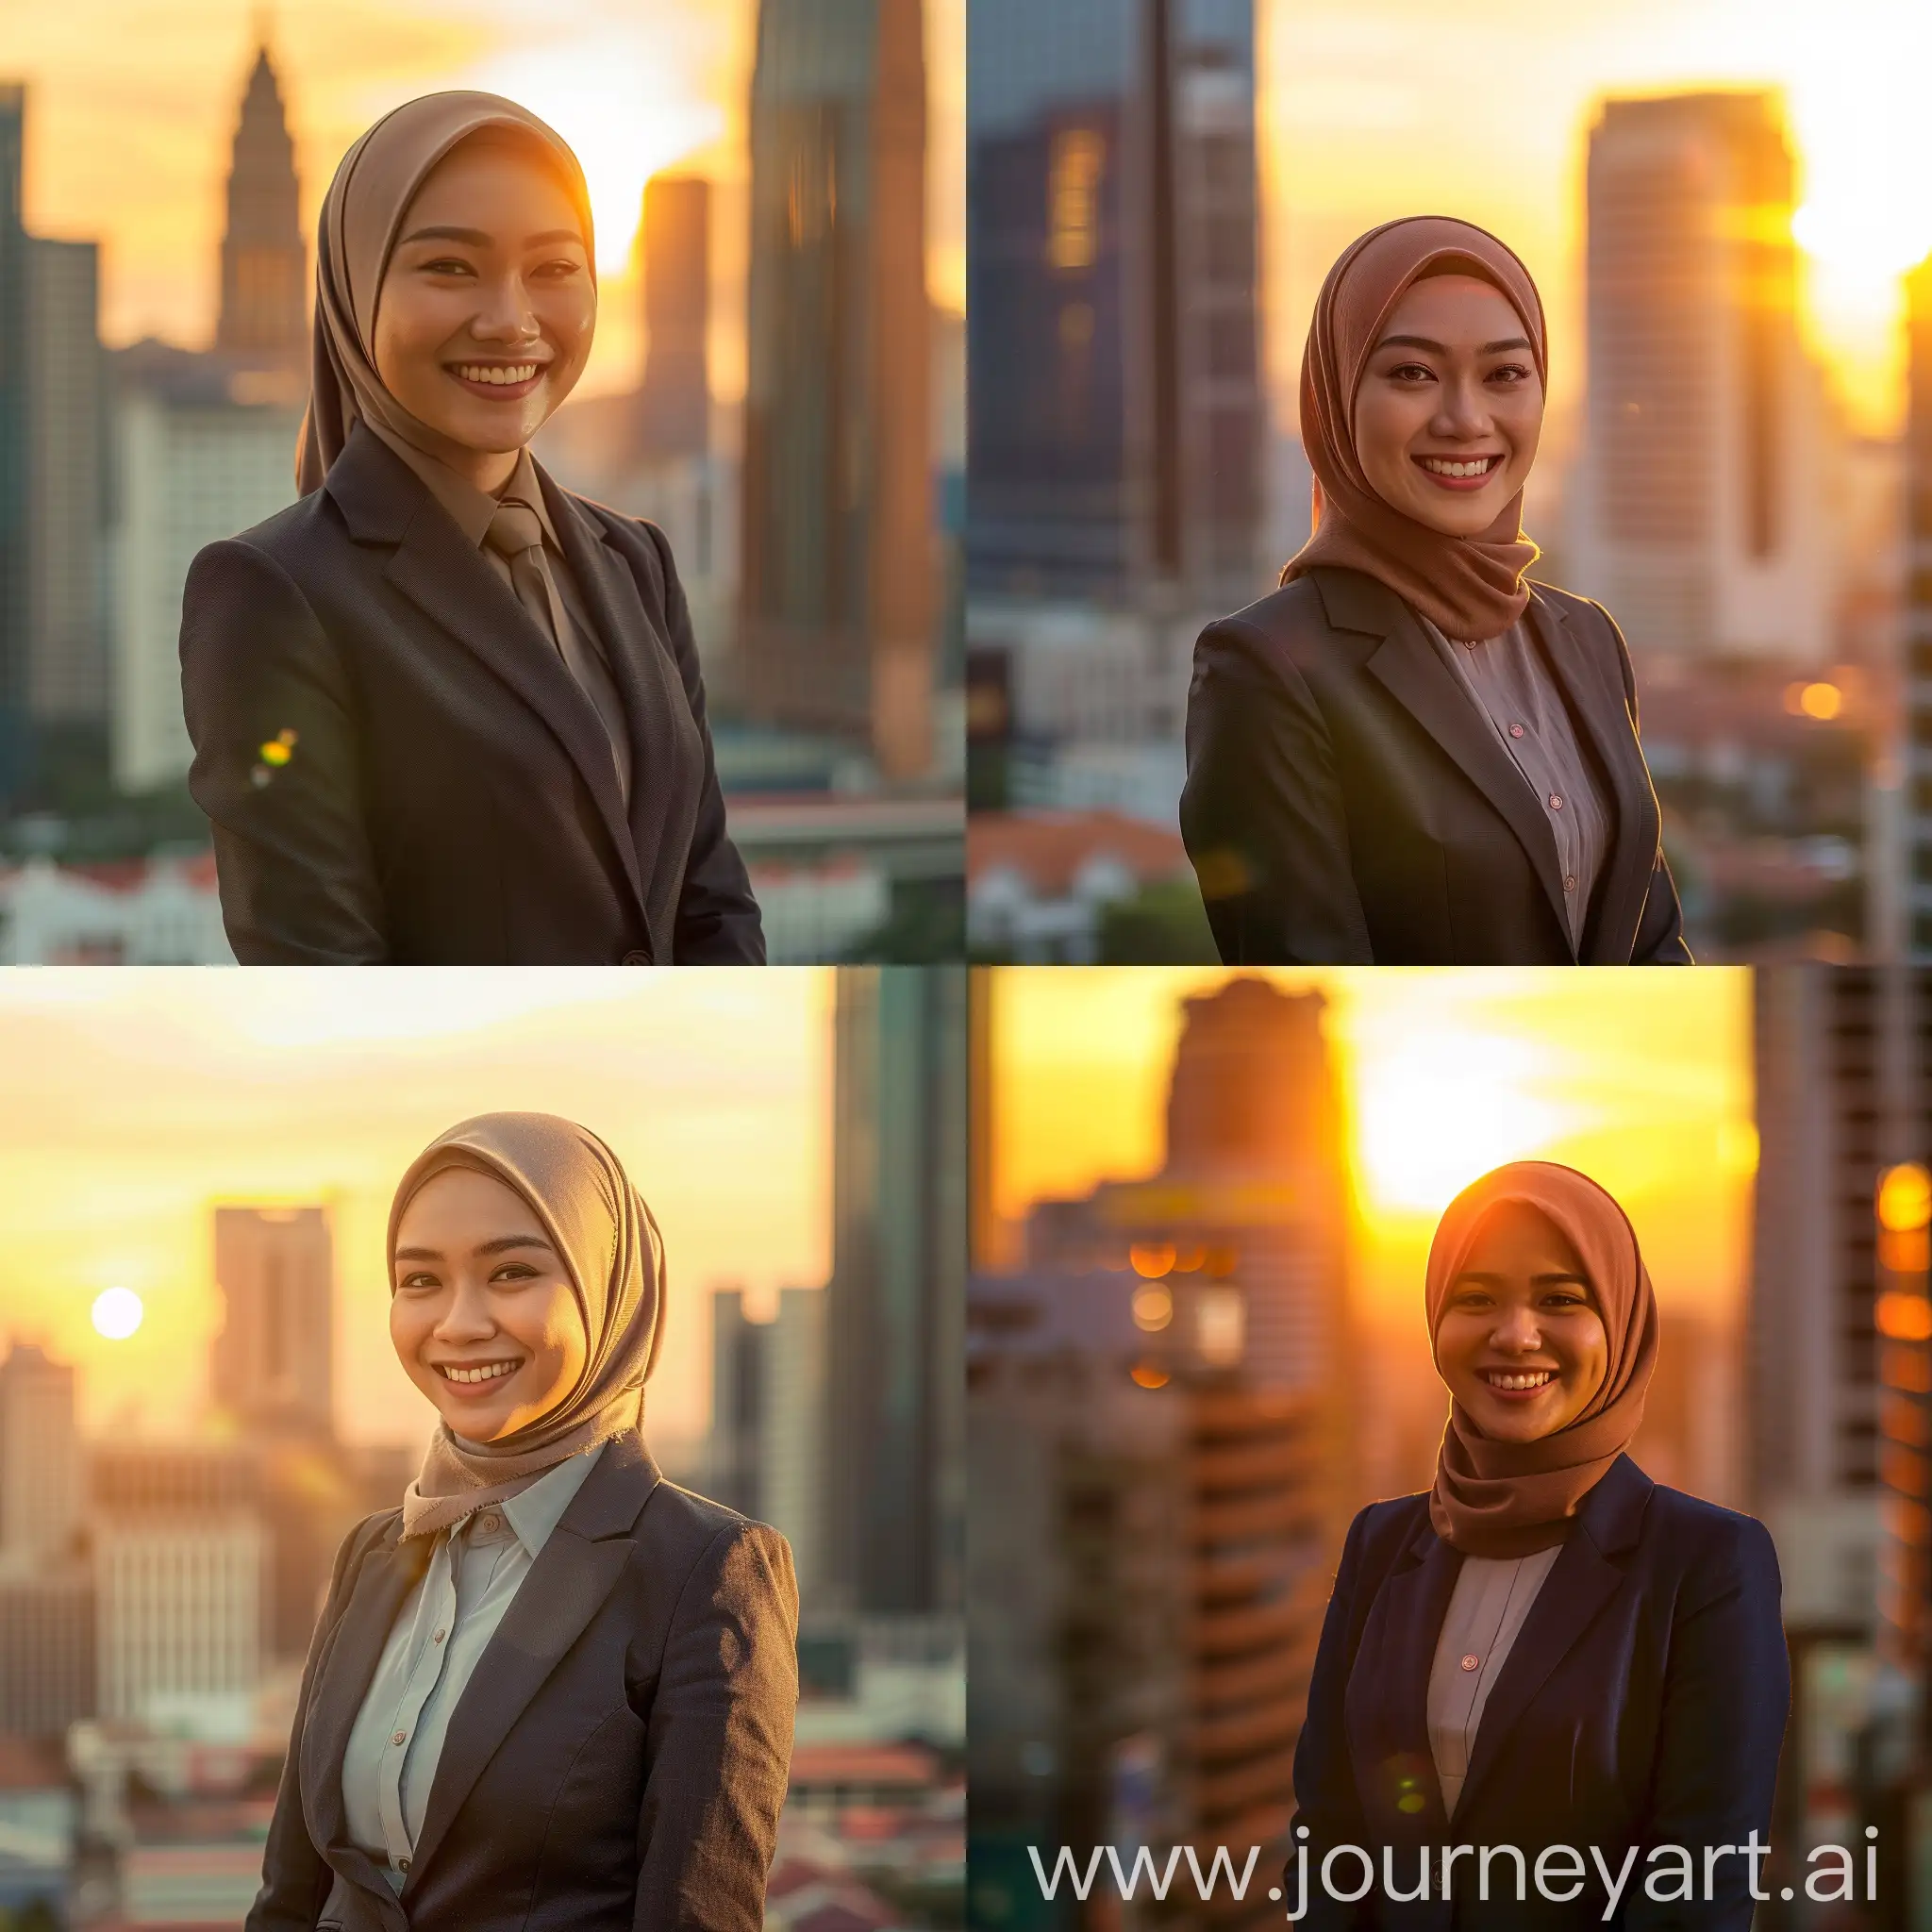 Confident-Malay-Muslimah-Businesswoman-in-Urban-Cityscape-at-Golden-Hour